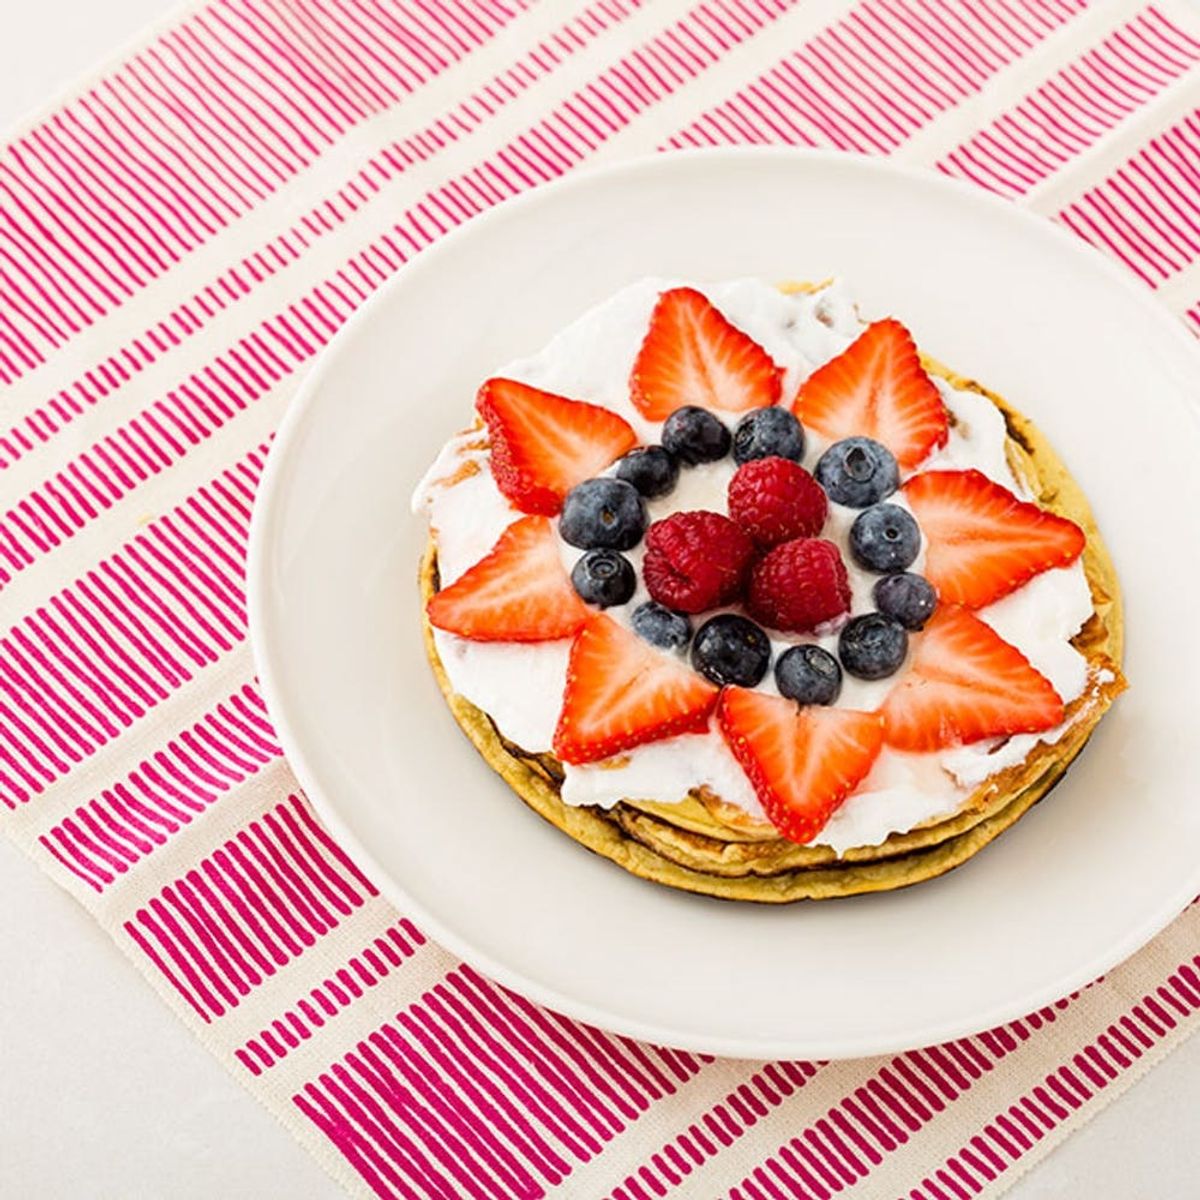 3 Protein-Packed Pancake Recipes to Start Your Day Off Healthy